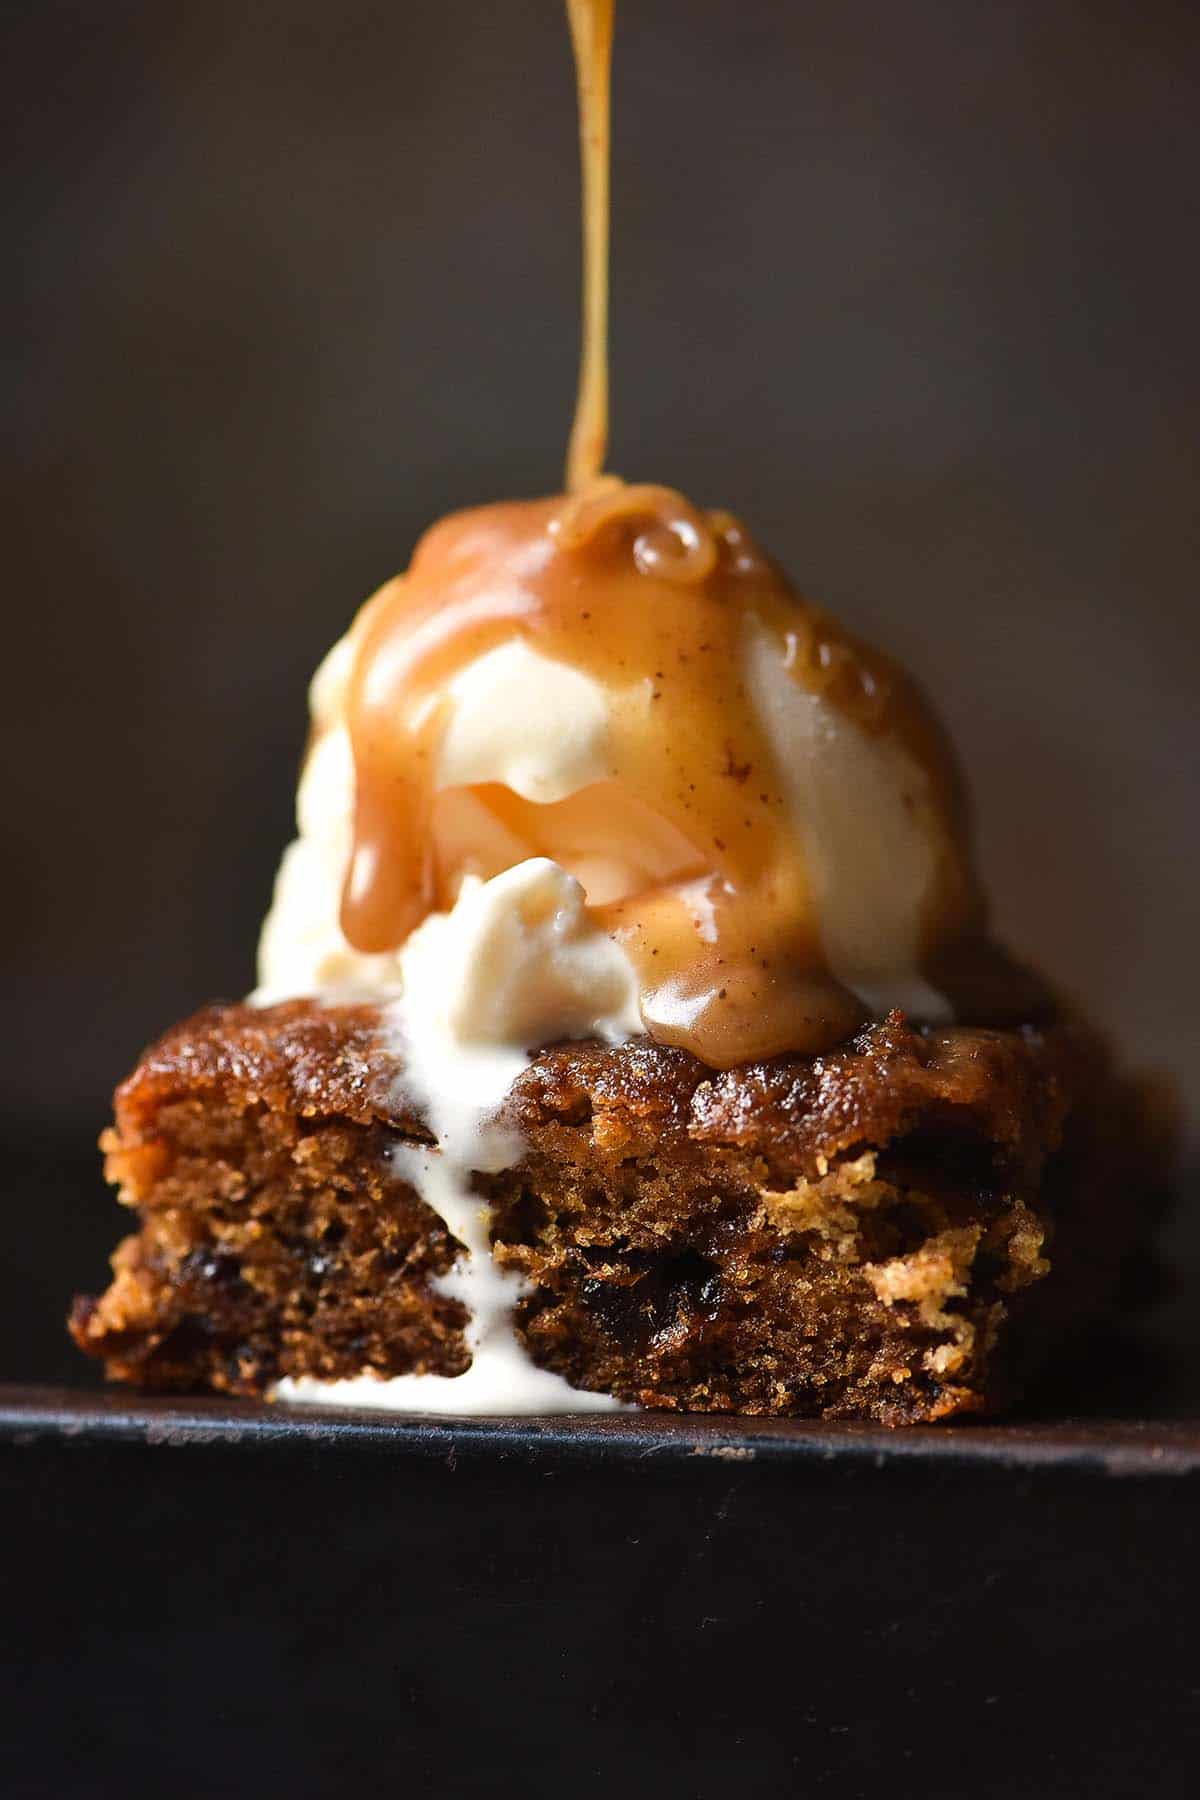 A dark and moody image of a slice of sticky date pudding against a dark backdrop topped with vanilla ice cream and finished with a drizzle of butterscotch sauce